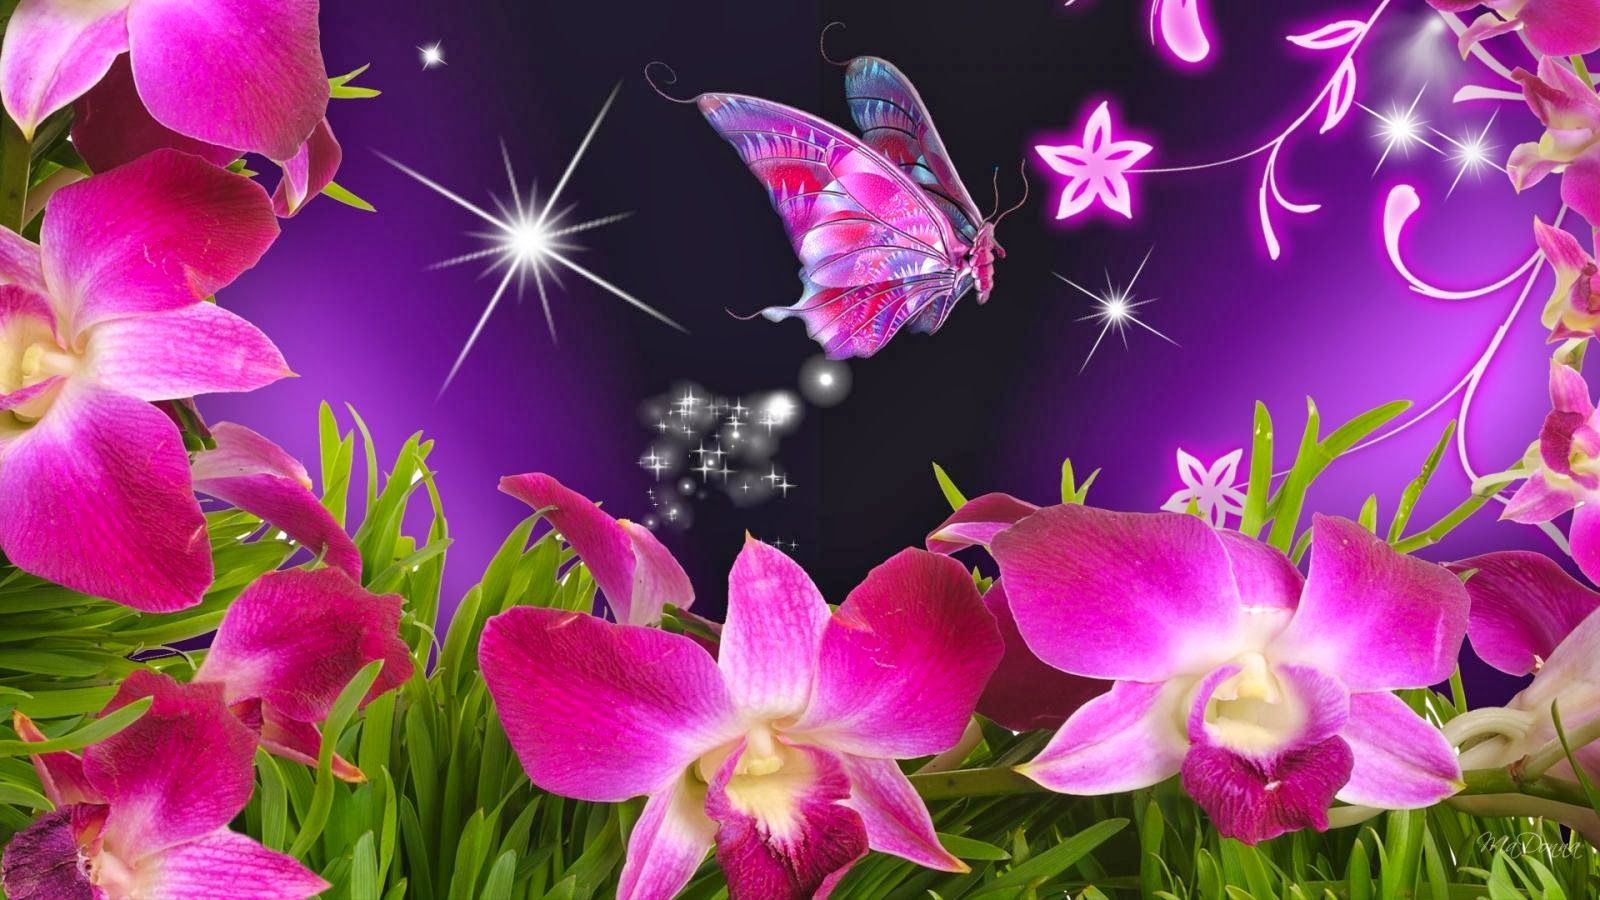 Flowers and Butterflies Wallpaper Free Flowers and Butterflies Background